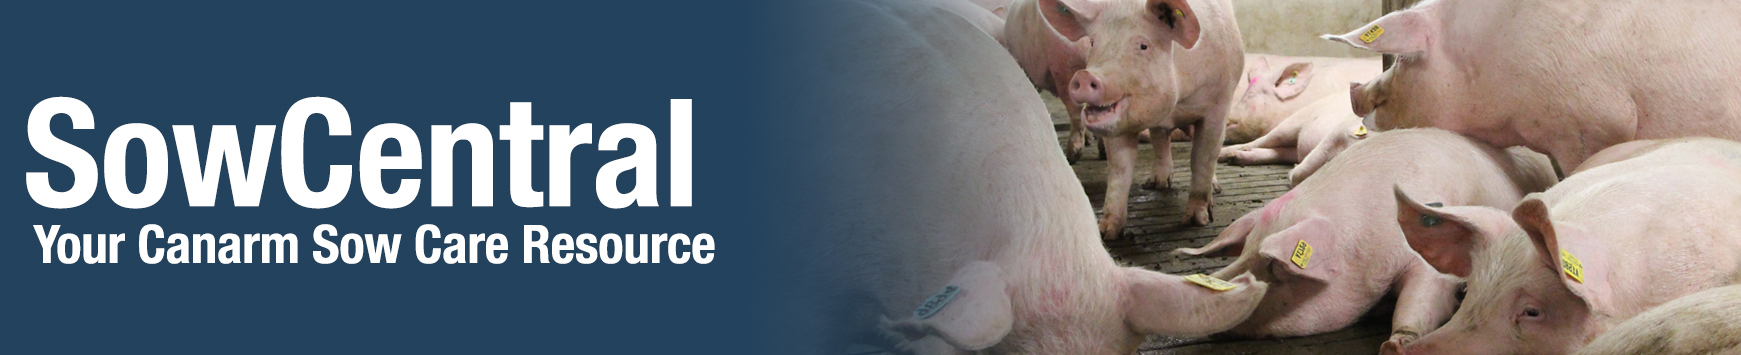 SowCentral, your canarm sow care resource.